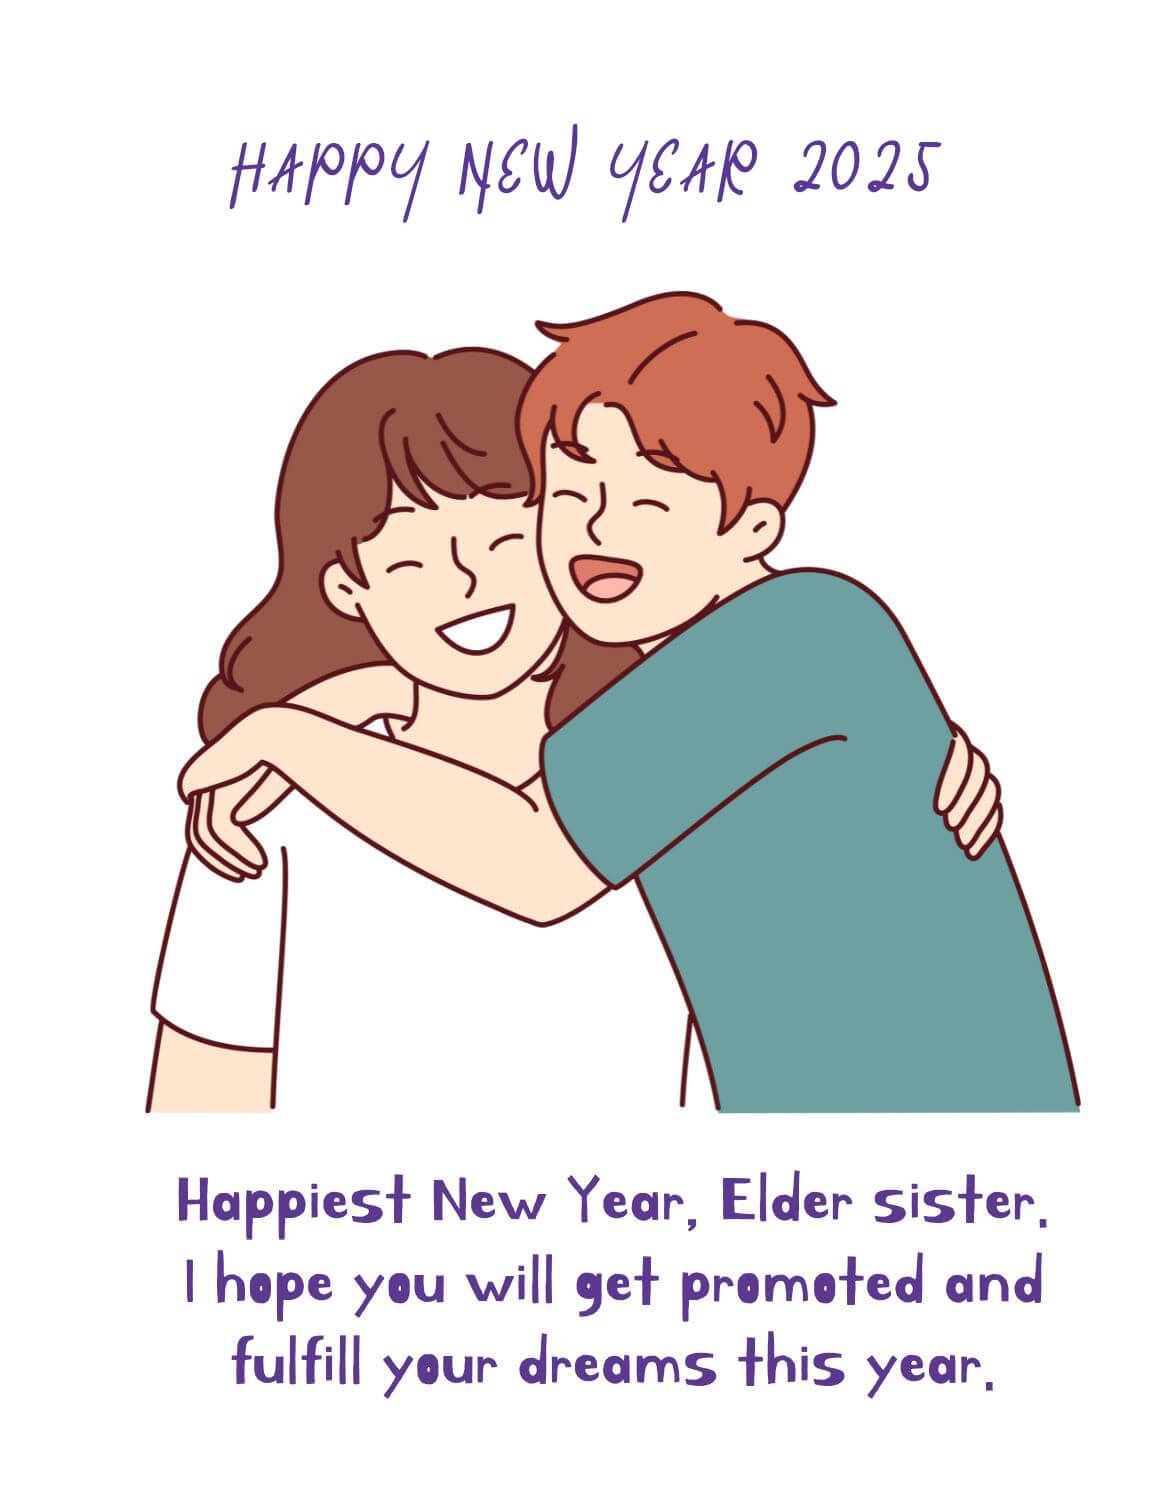 2025 Happy New Year Wishes For Elder Sister